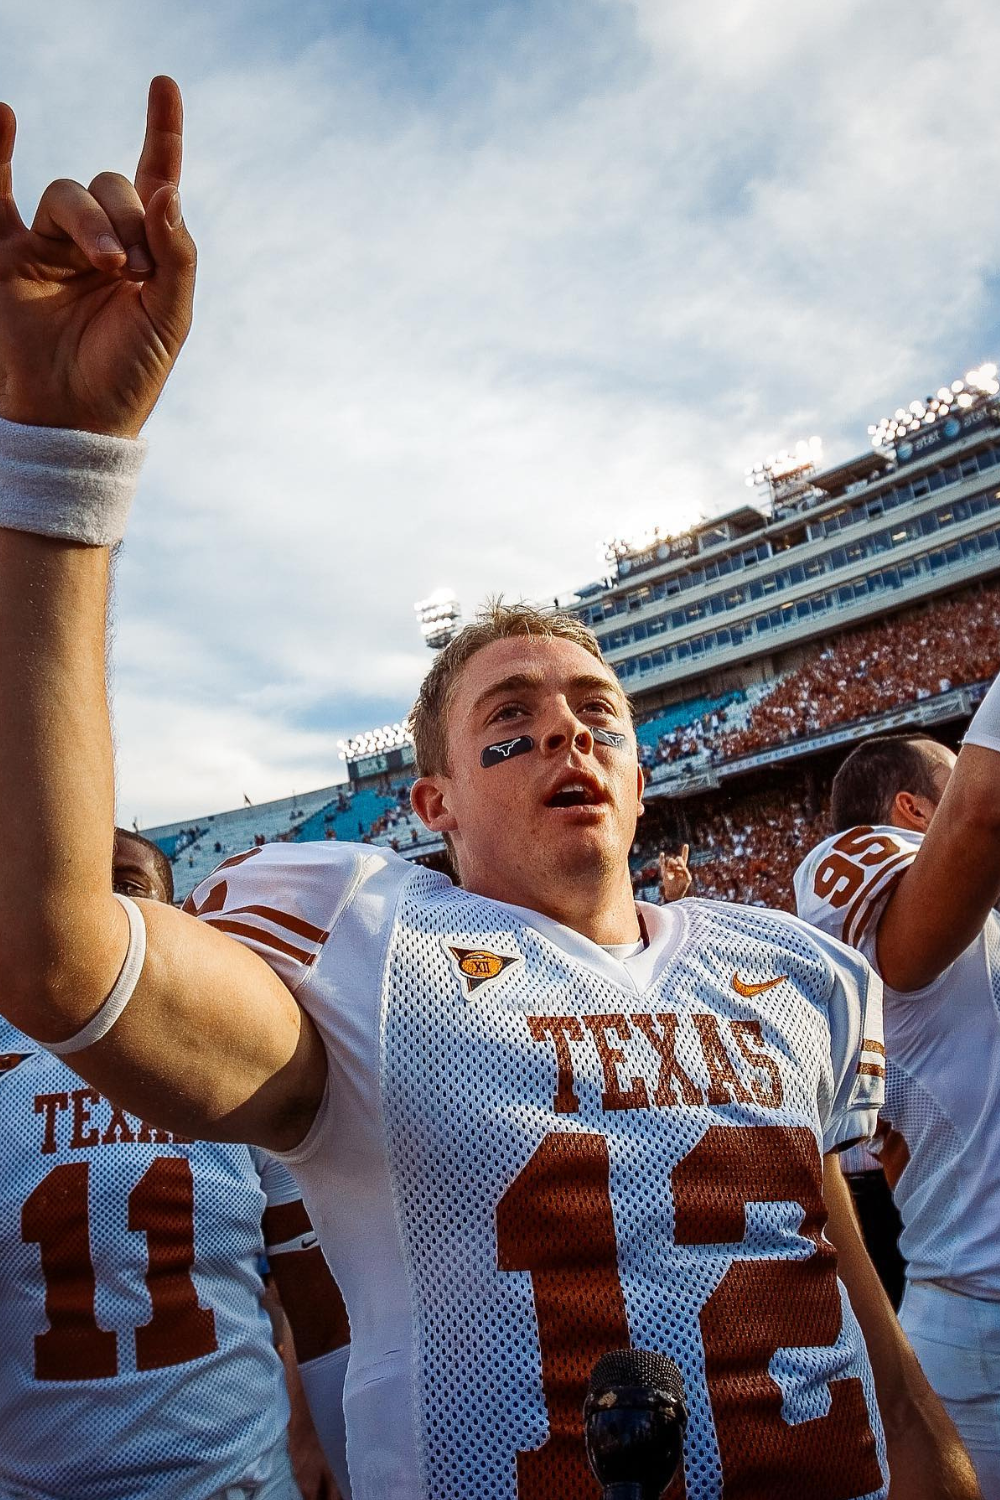 Colt McCoy During His Collegiate Years At The University of Texas